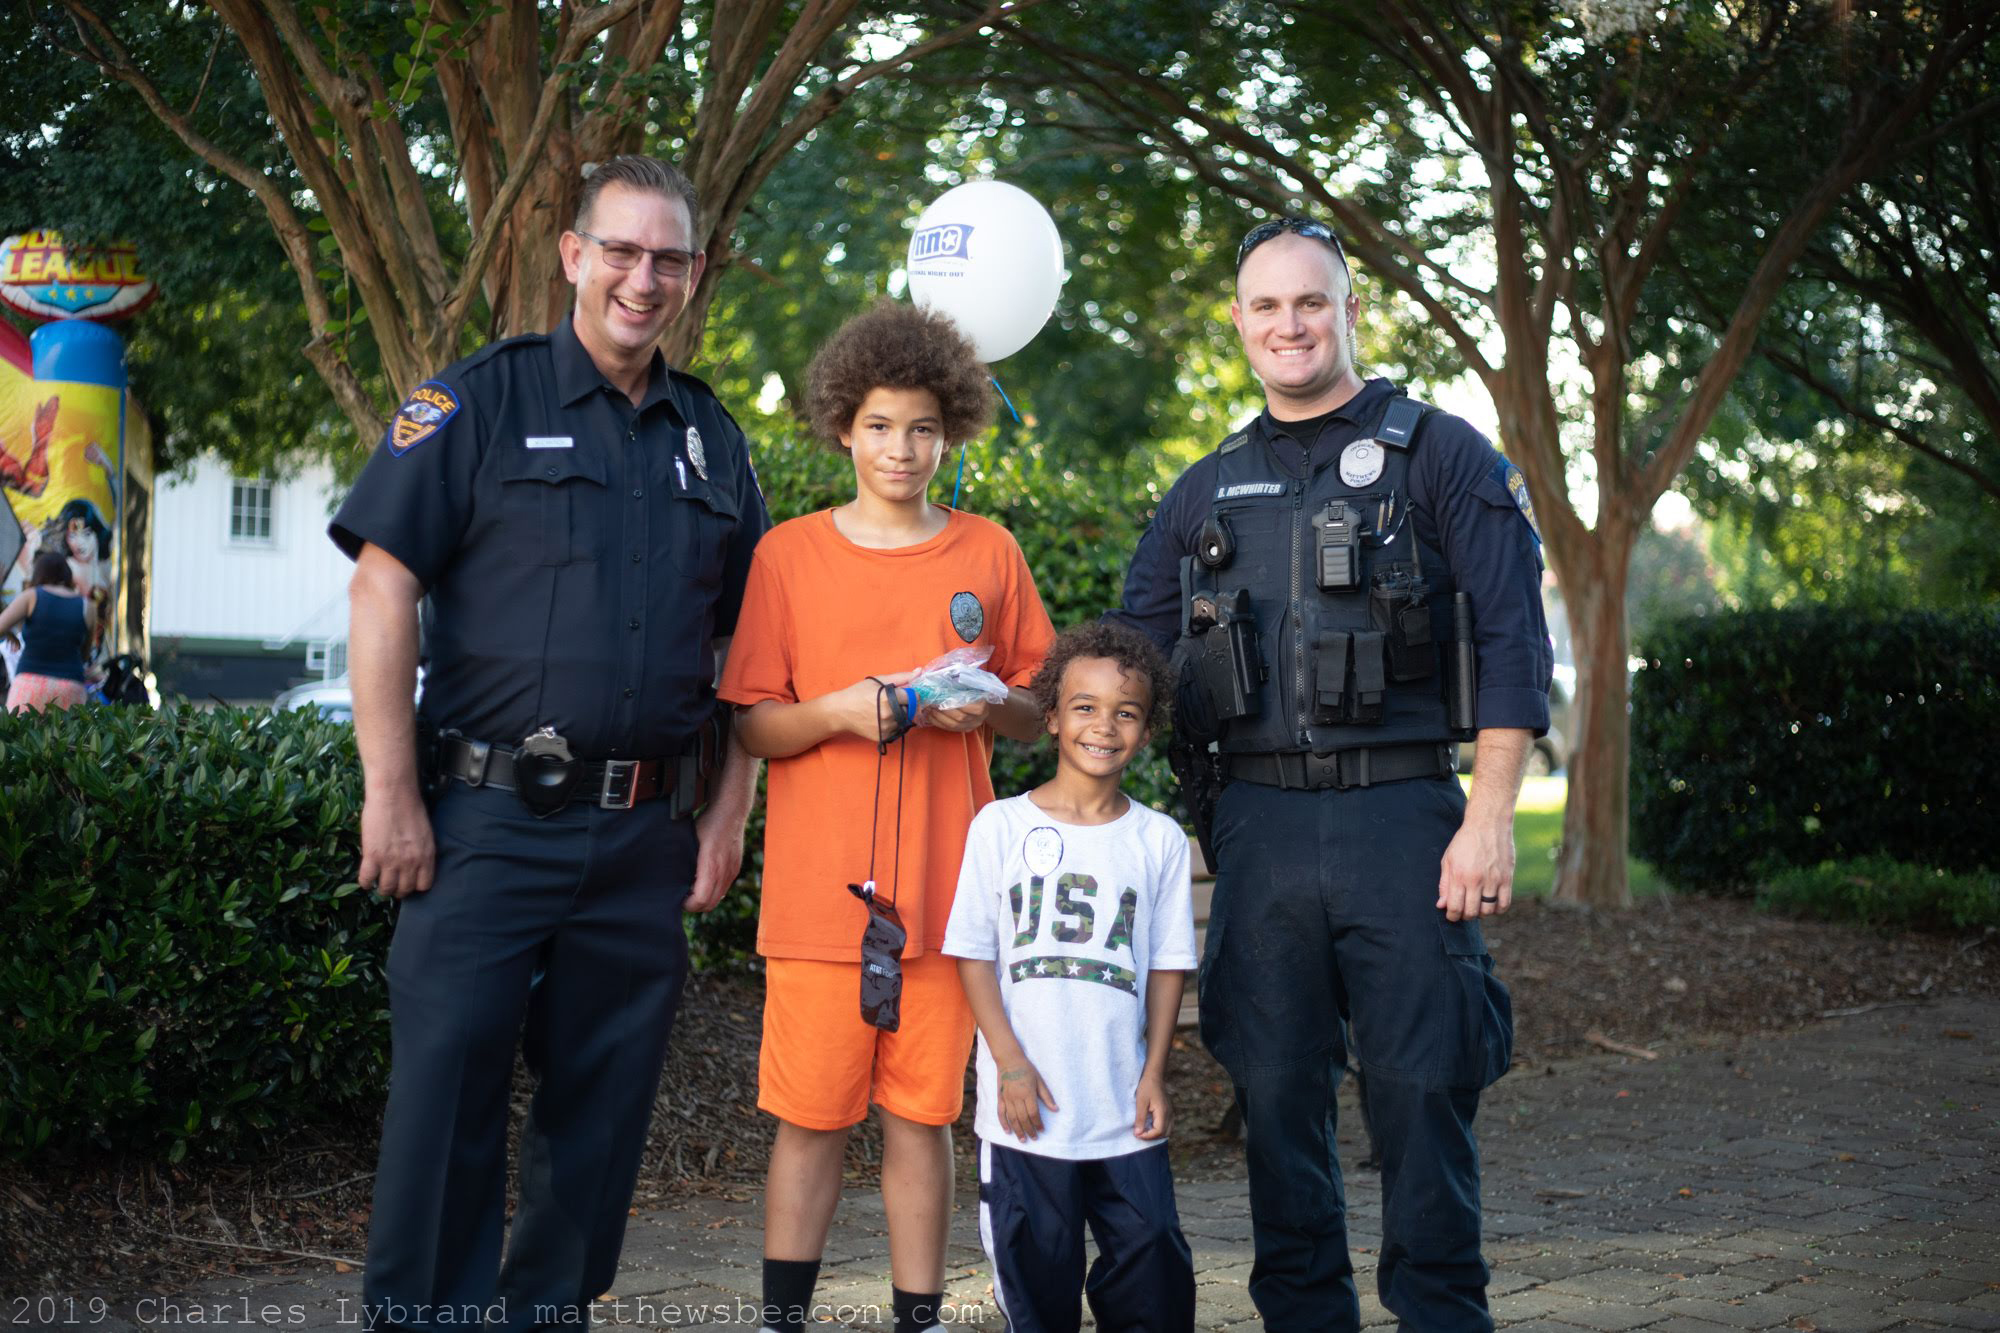 beacon national night out 3.jpg